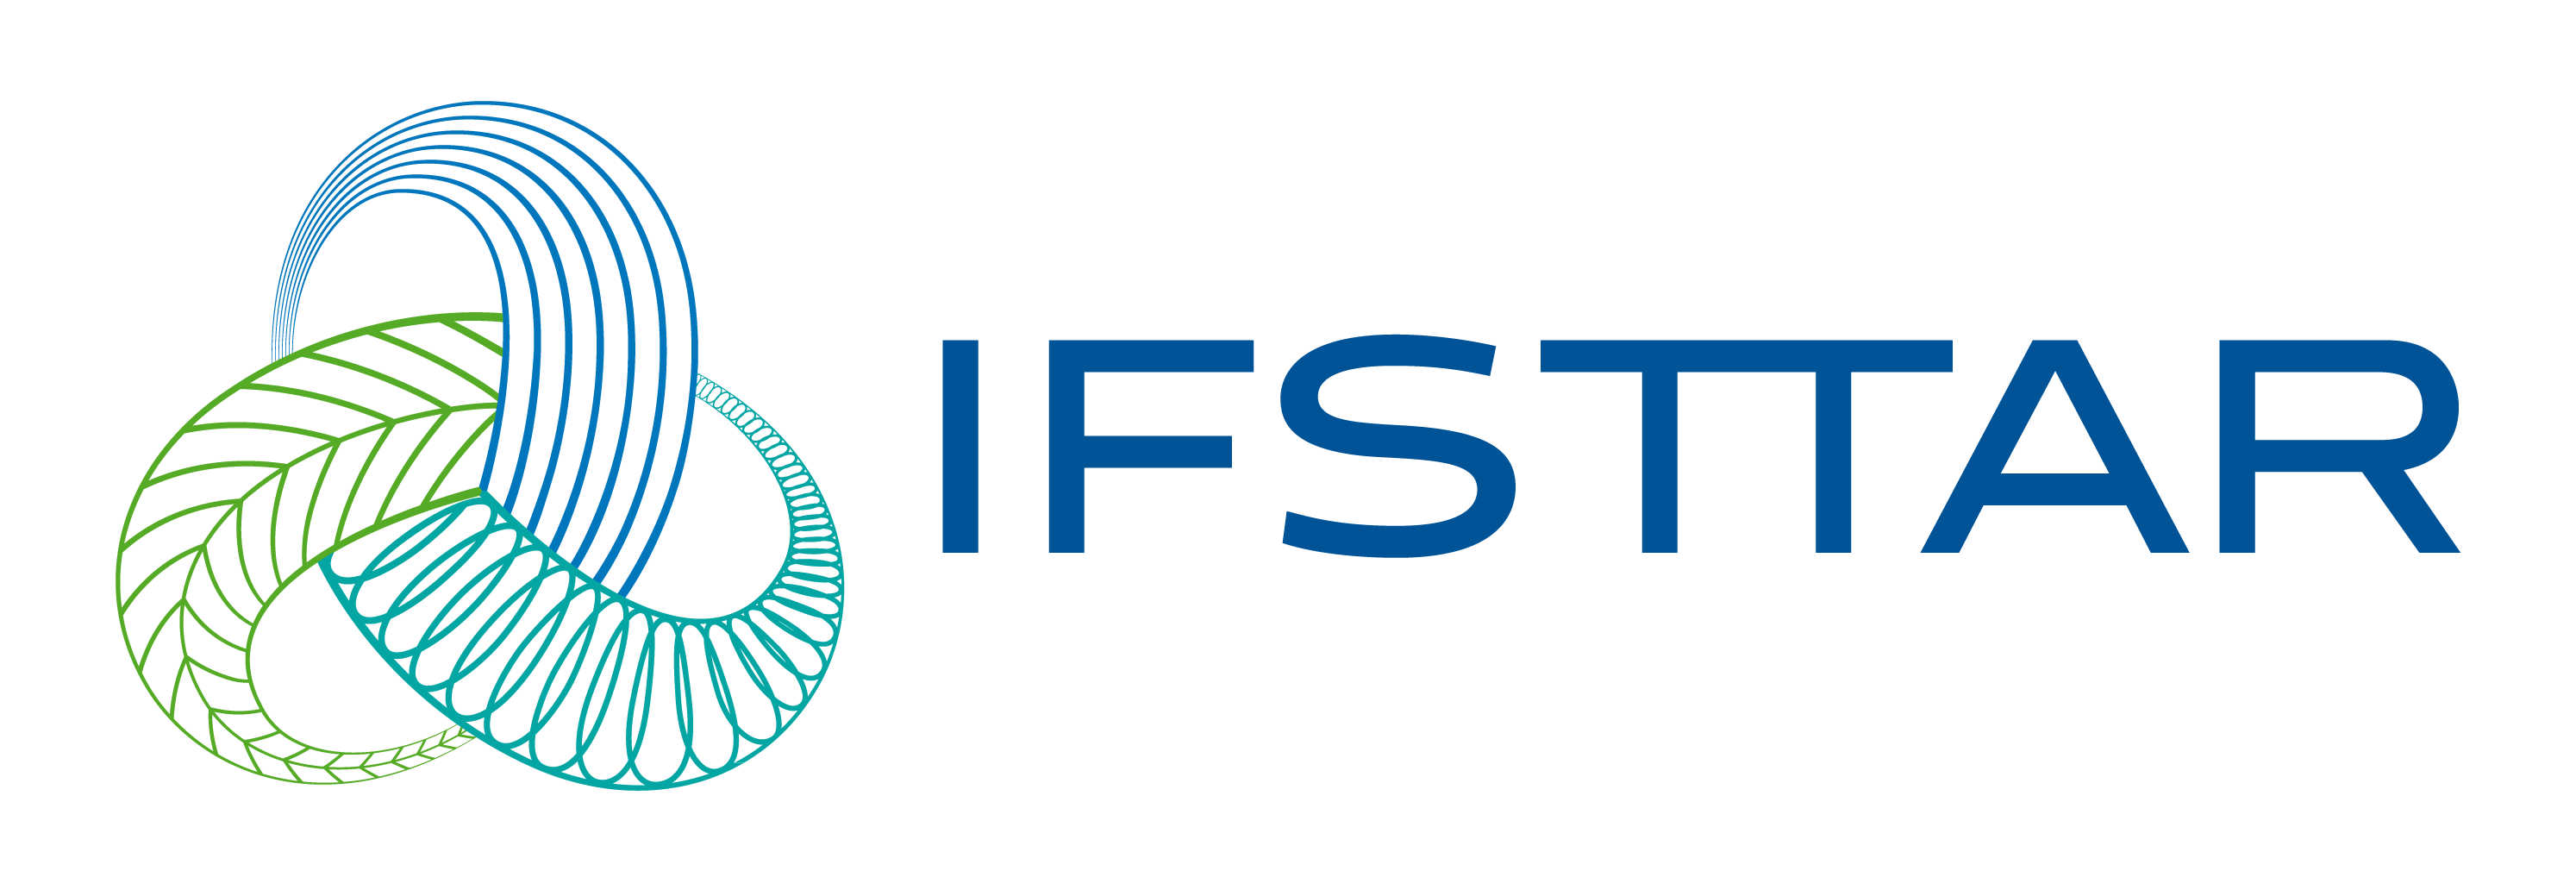 Ifsttar_logo_coul.png